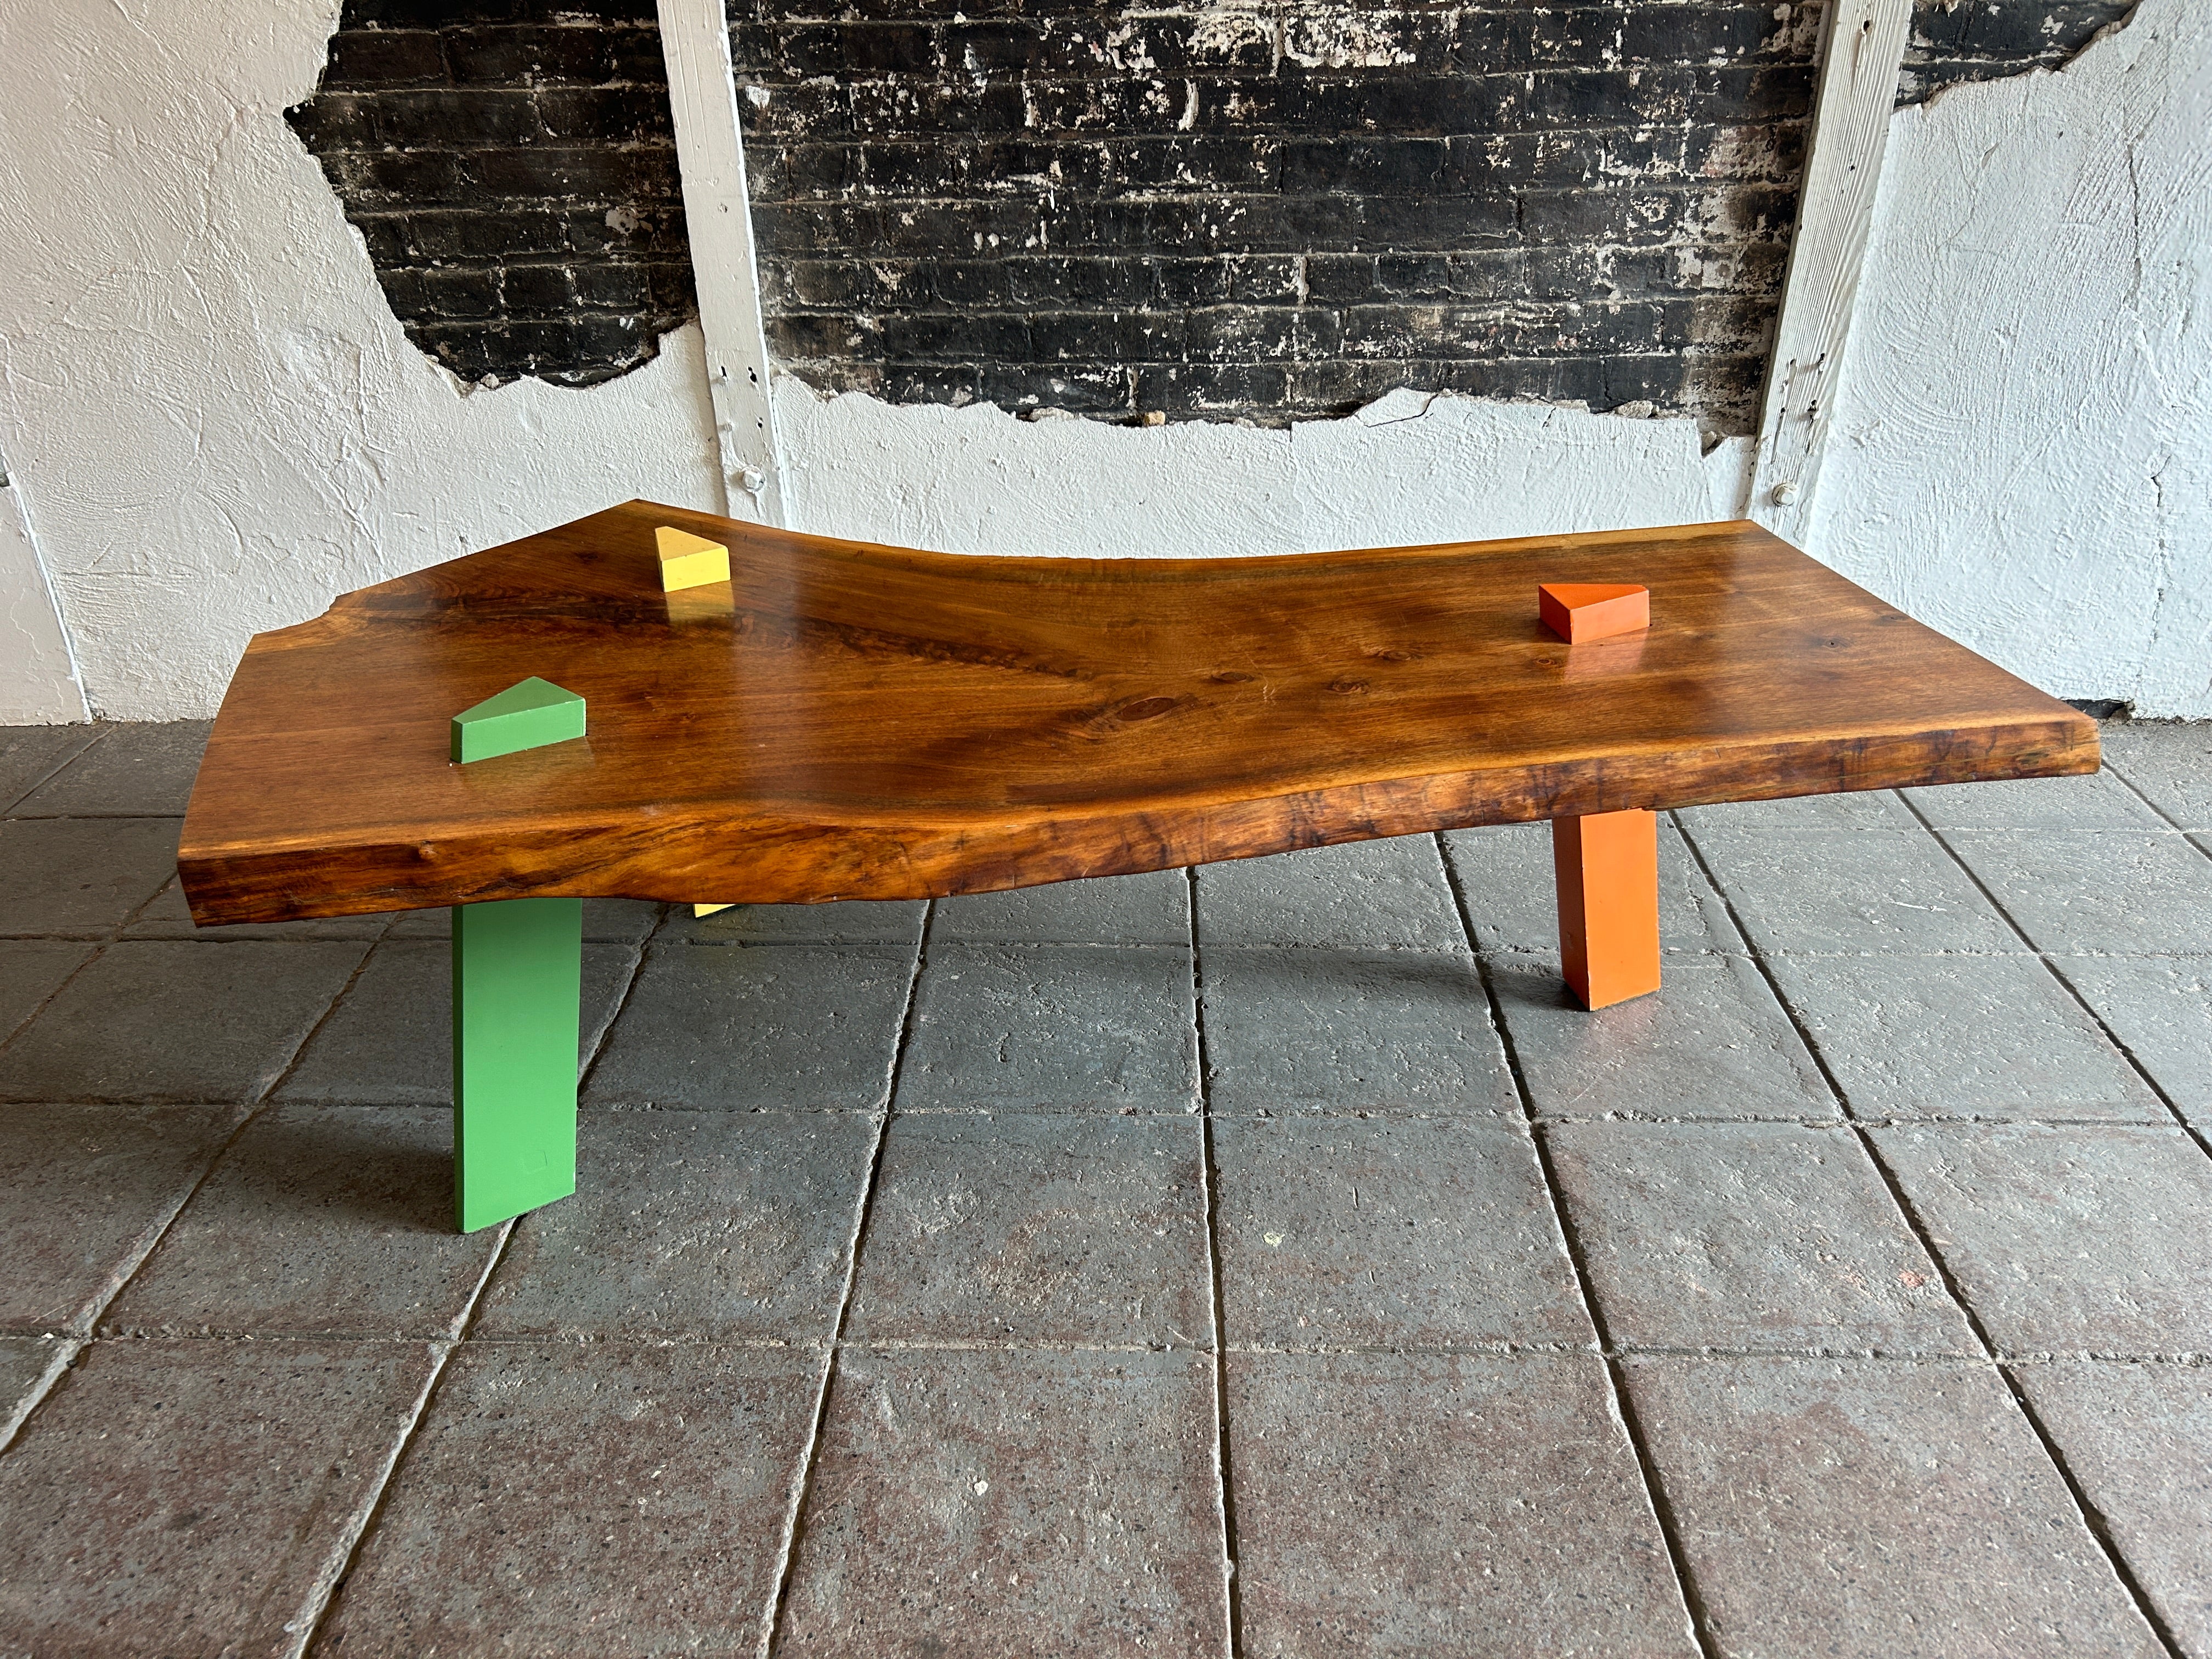 Post Modern Walnut Slab coffee table with colored triangle angled legs that protrude through the top slab. studio craft. 2” thick walnut slab top in beautiful condition. Very fun studio craft hand made coffee table or bench. Very heavy and solid